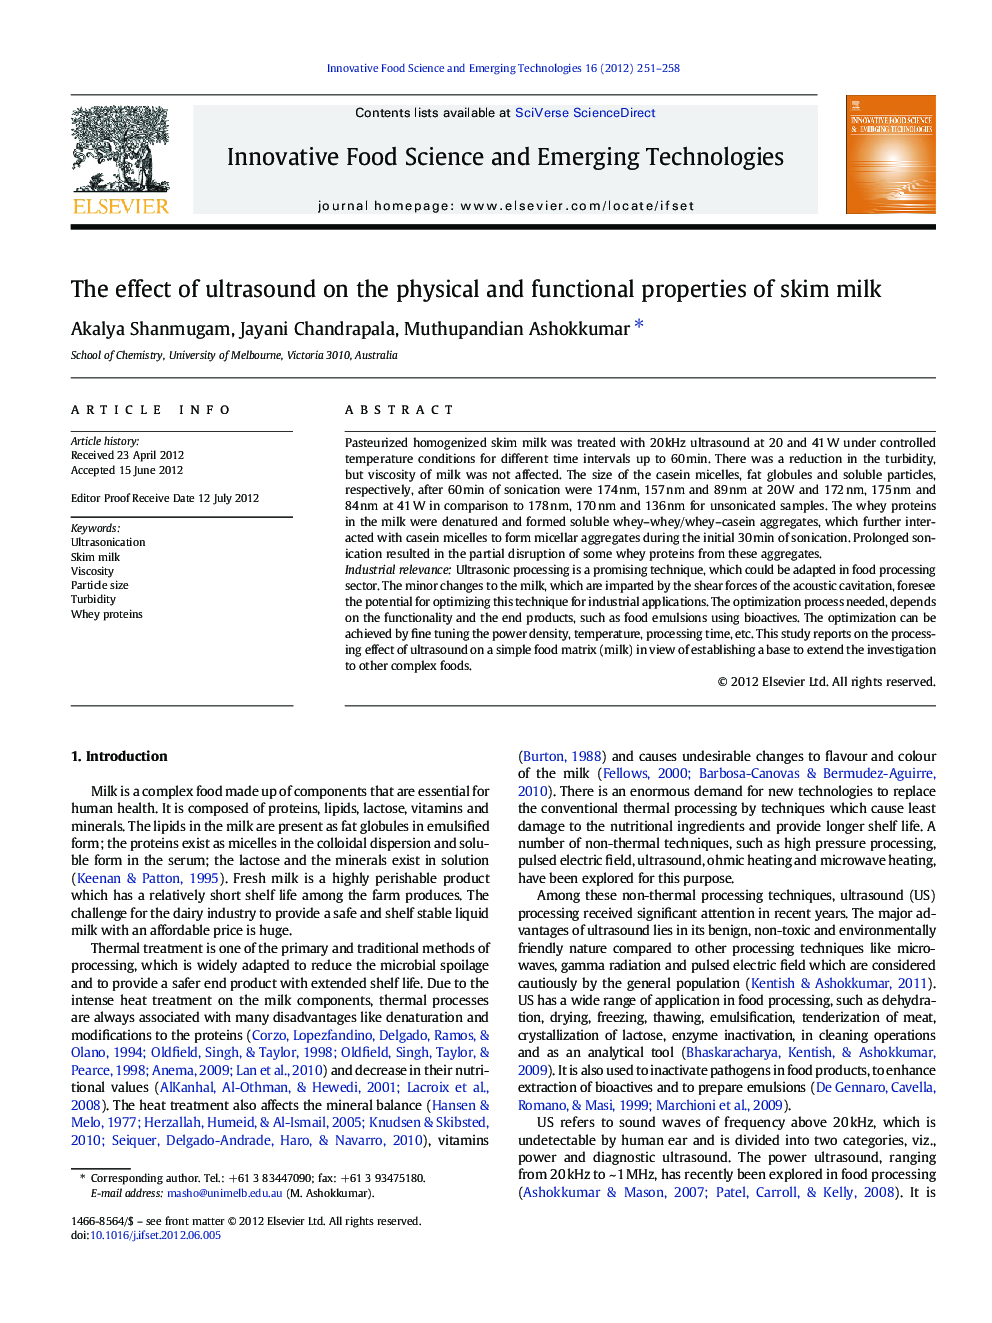 The effect of ultrasound on the physical and functional properties of skim milk